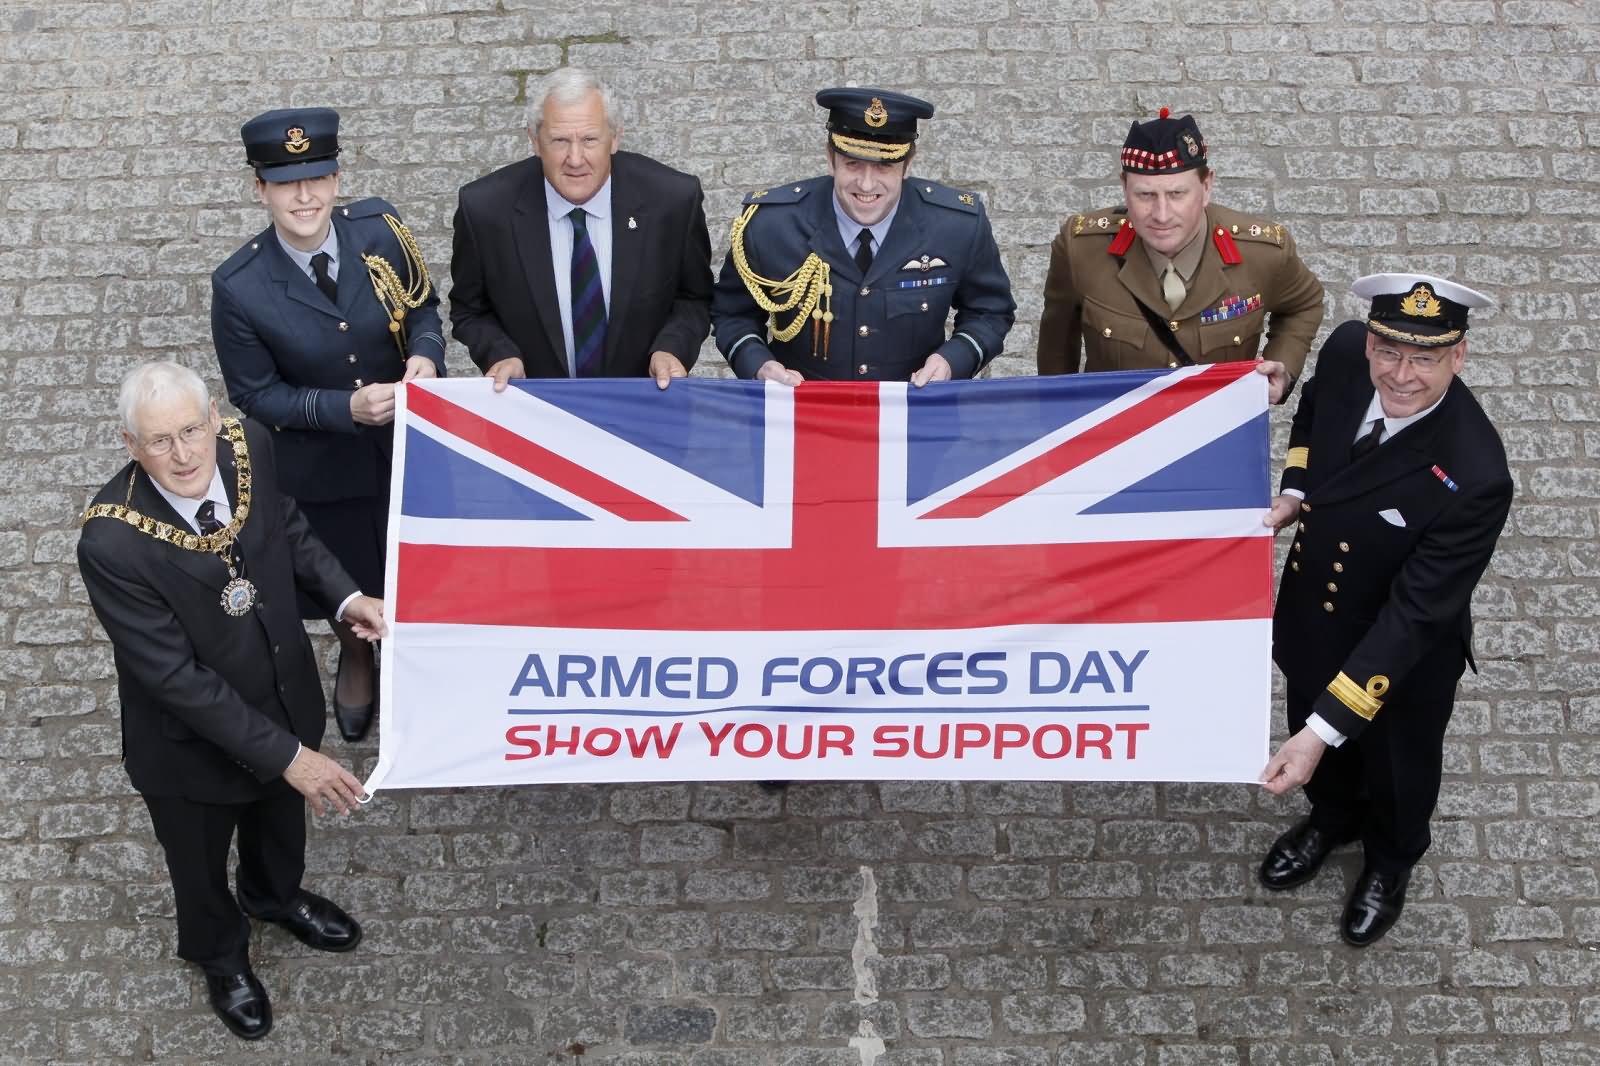 Army Officers With Armed Forces Day Flag Picture